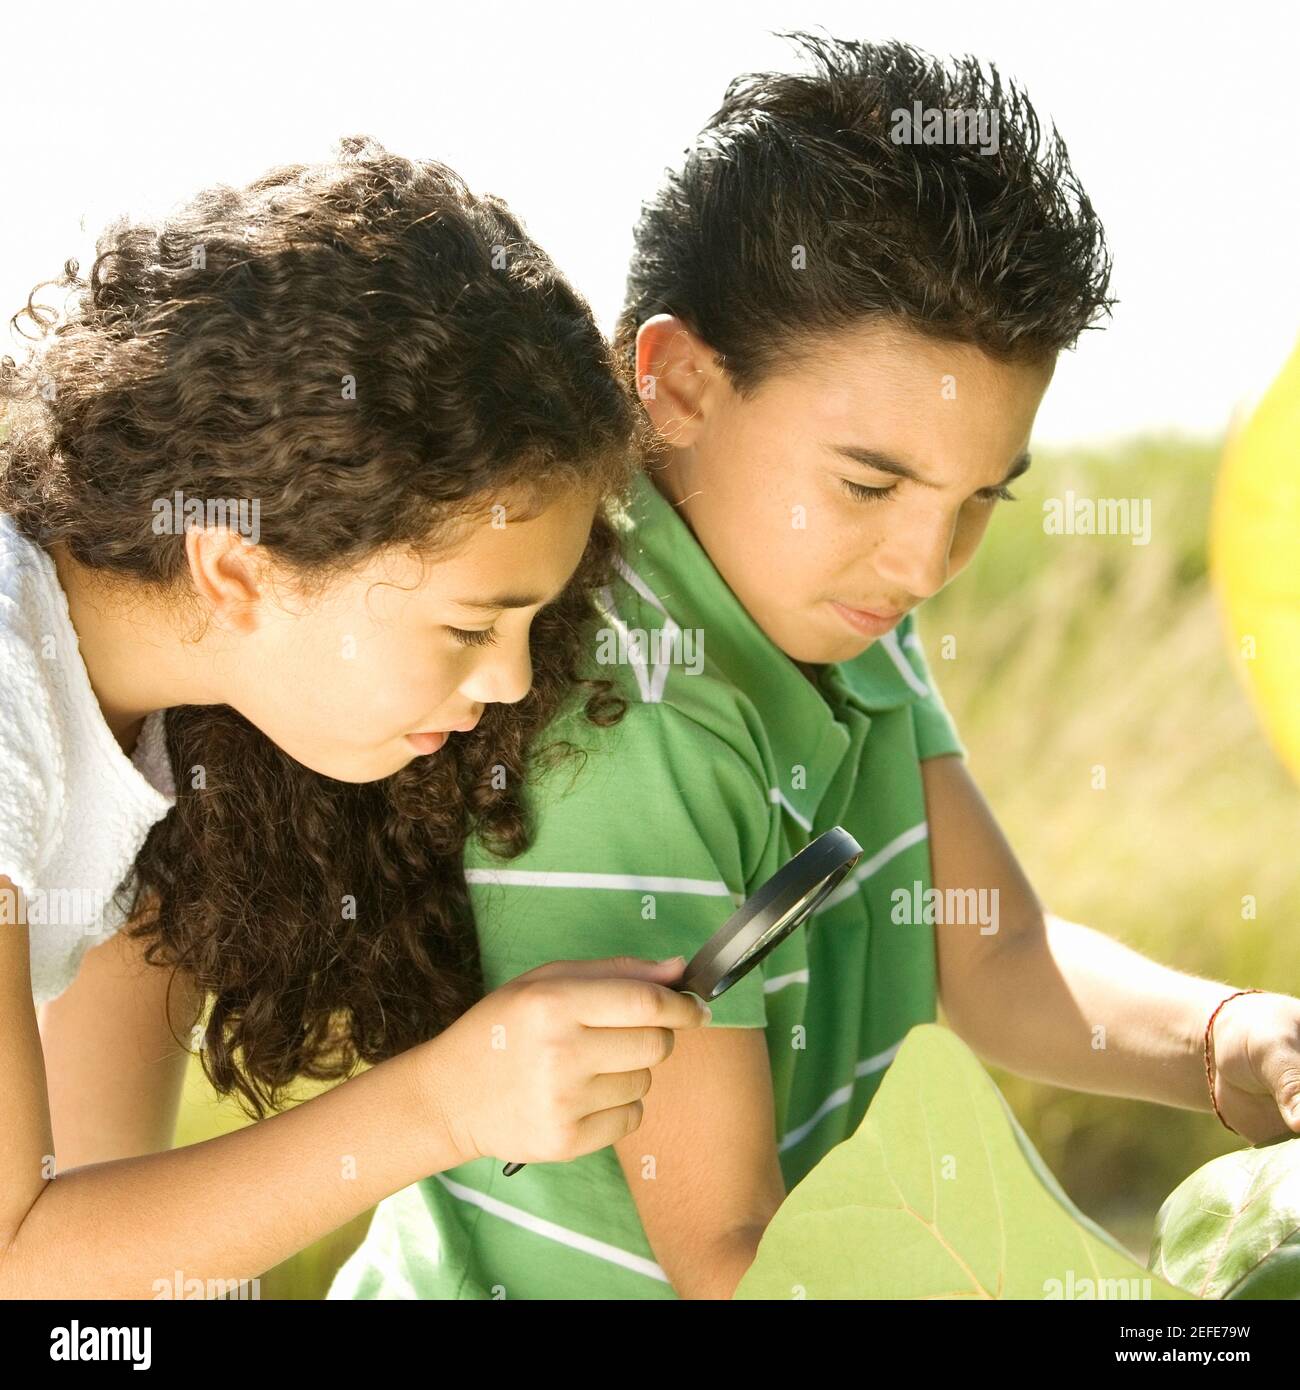 Close-up of a boy and a girl looking through a magnifying glass Stock Photo